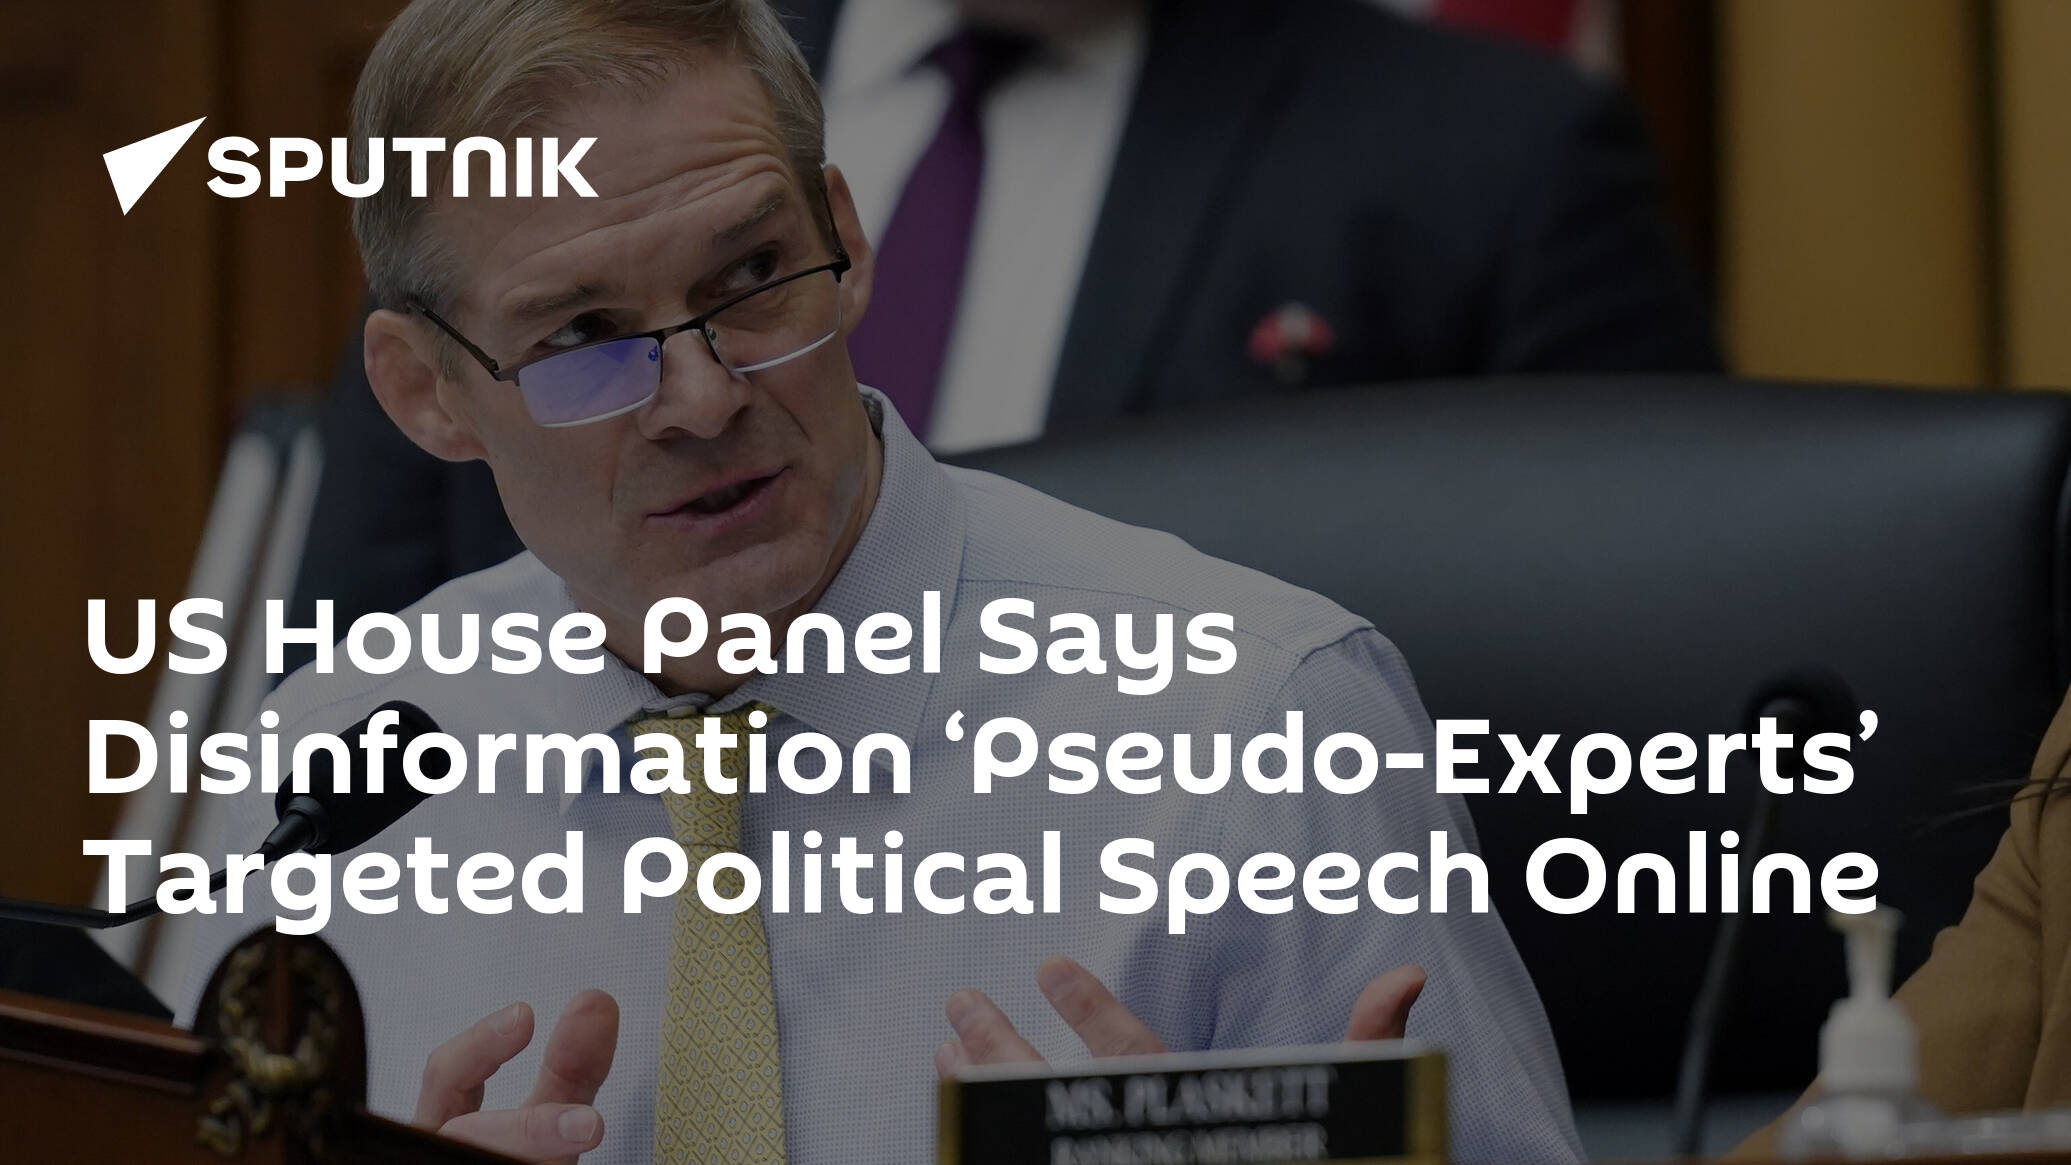 US House Panel Says Disinformation ‘Pseudo-Experts’ Targeted Political Speech Online